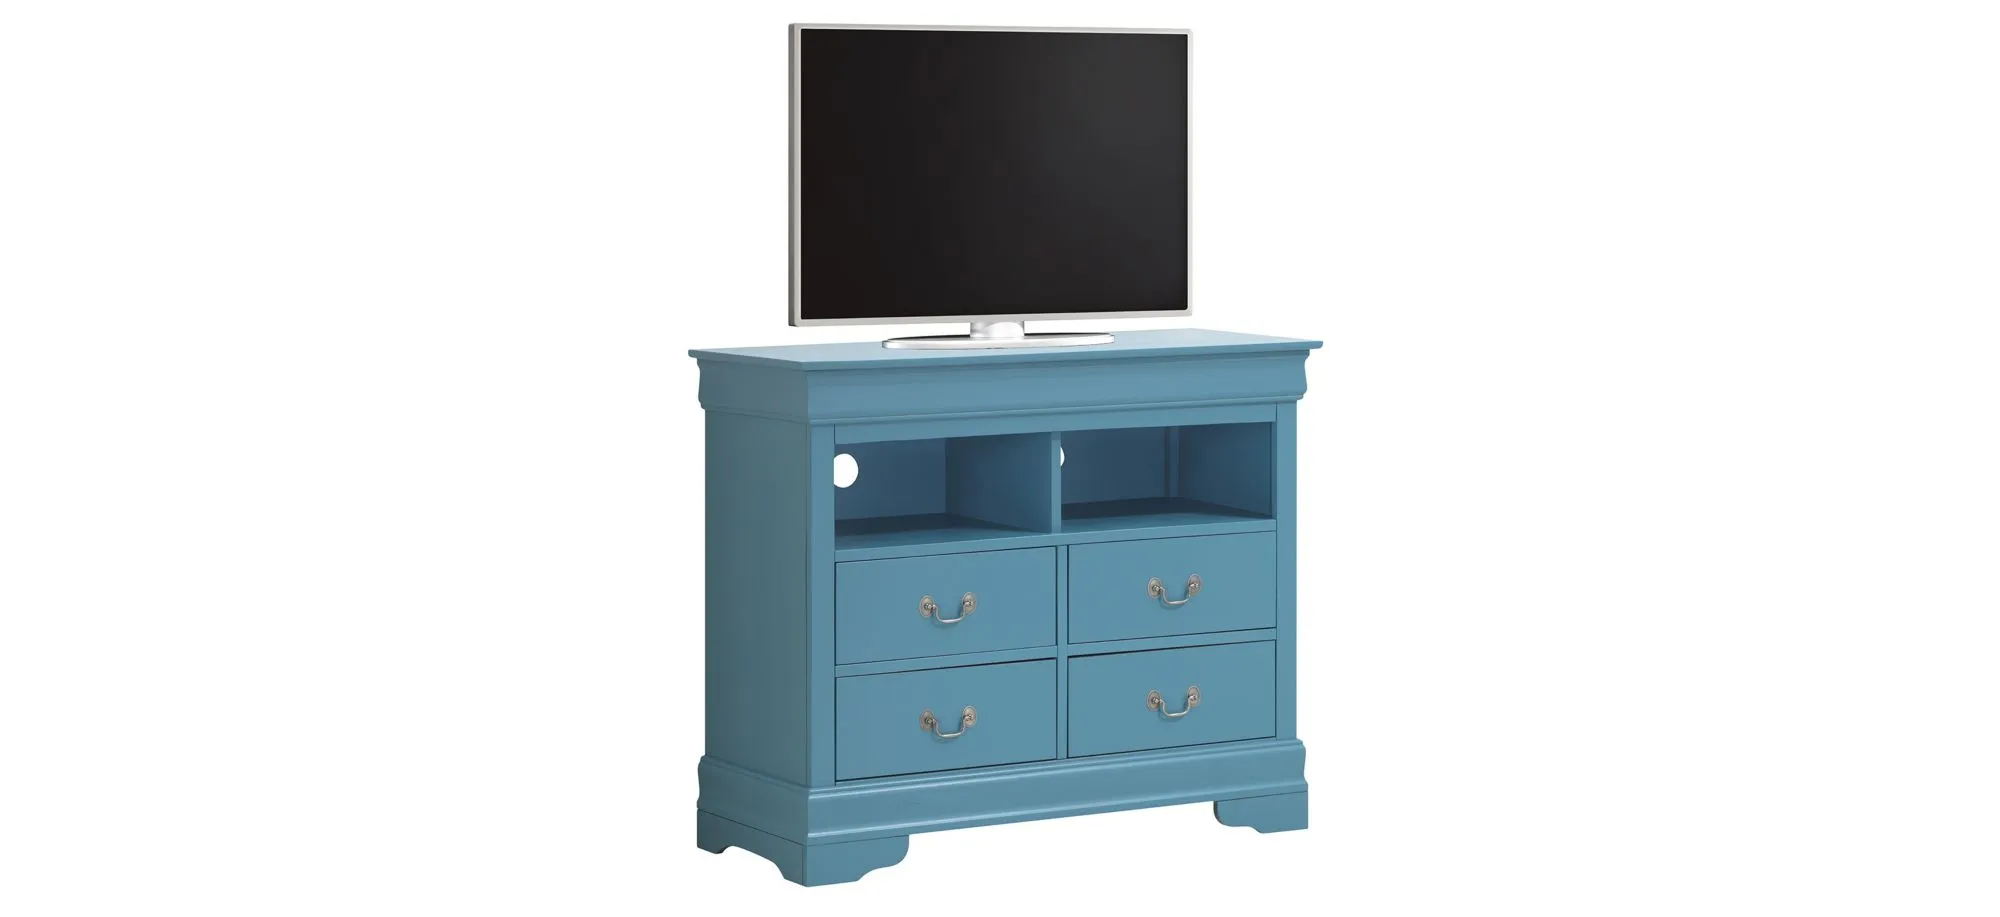 Rossie Media Chest in Blue by Glory Furniture